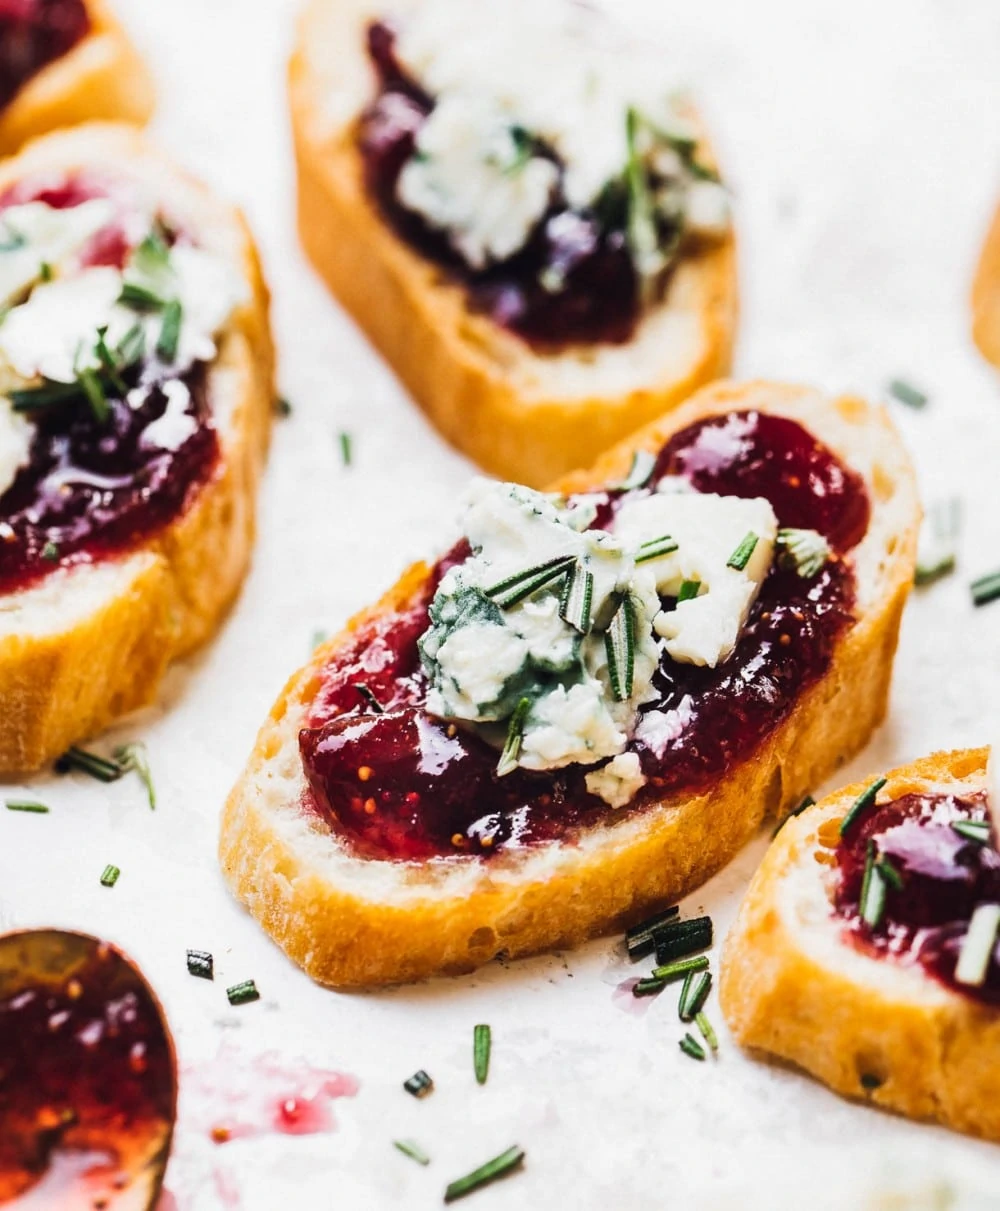 multiple crostinis with fig jam layer, then blue cheese on top and rosemary sprinkled